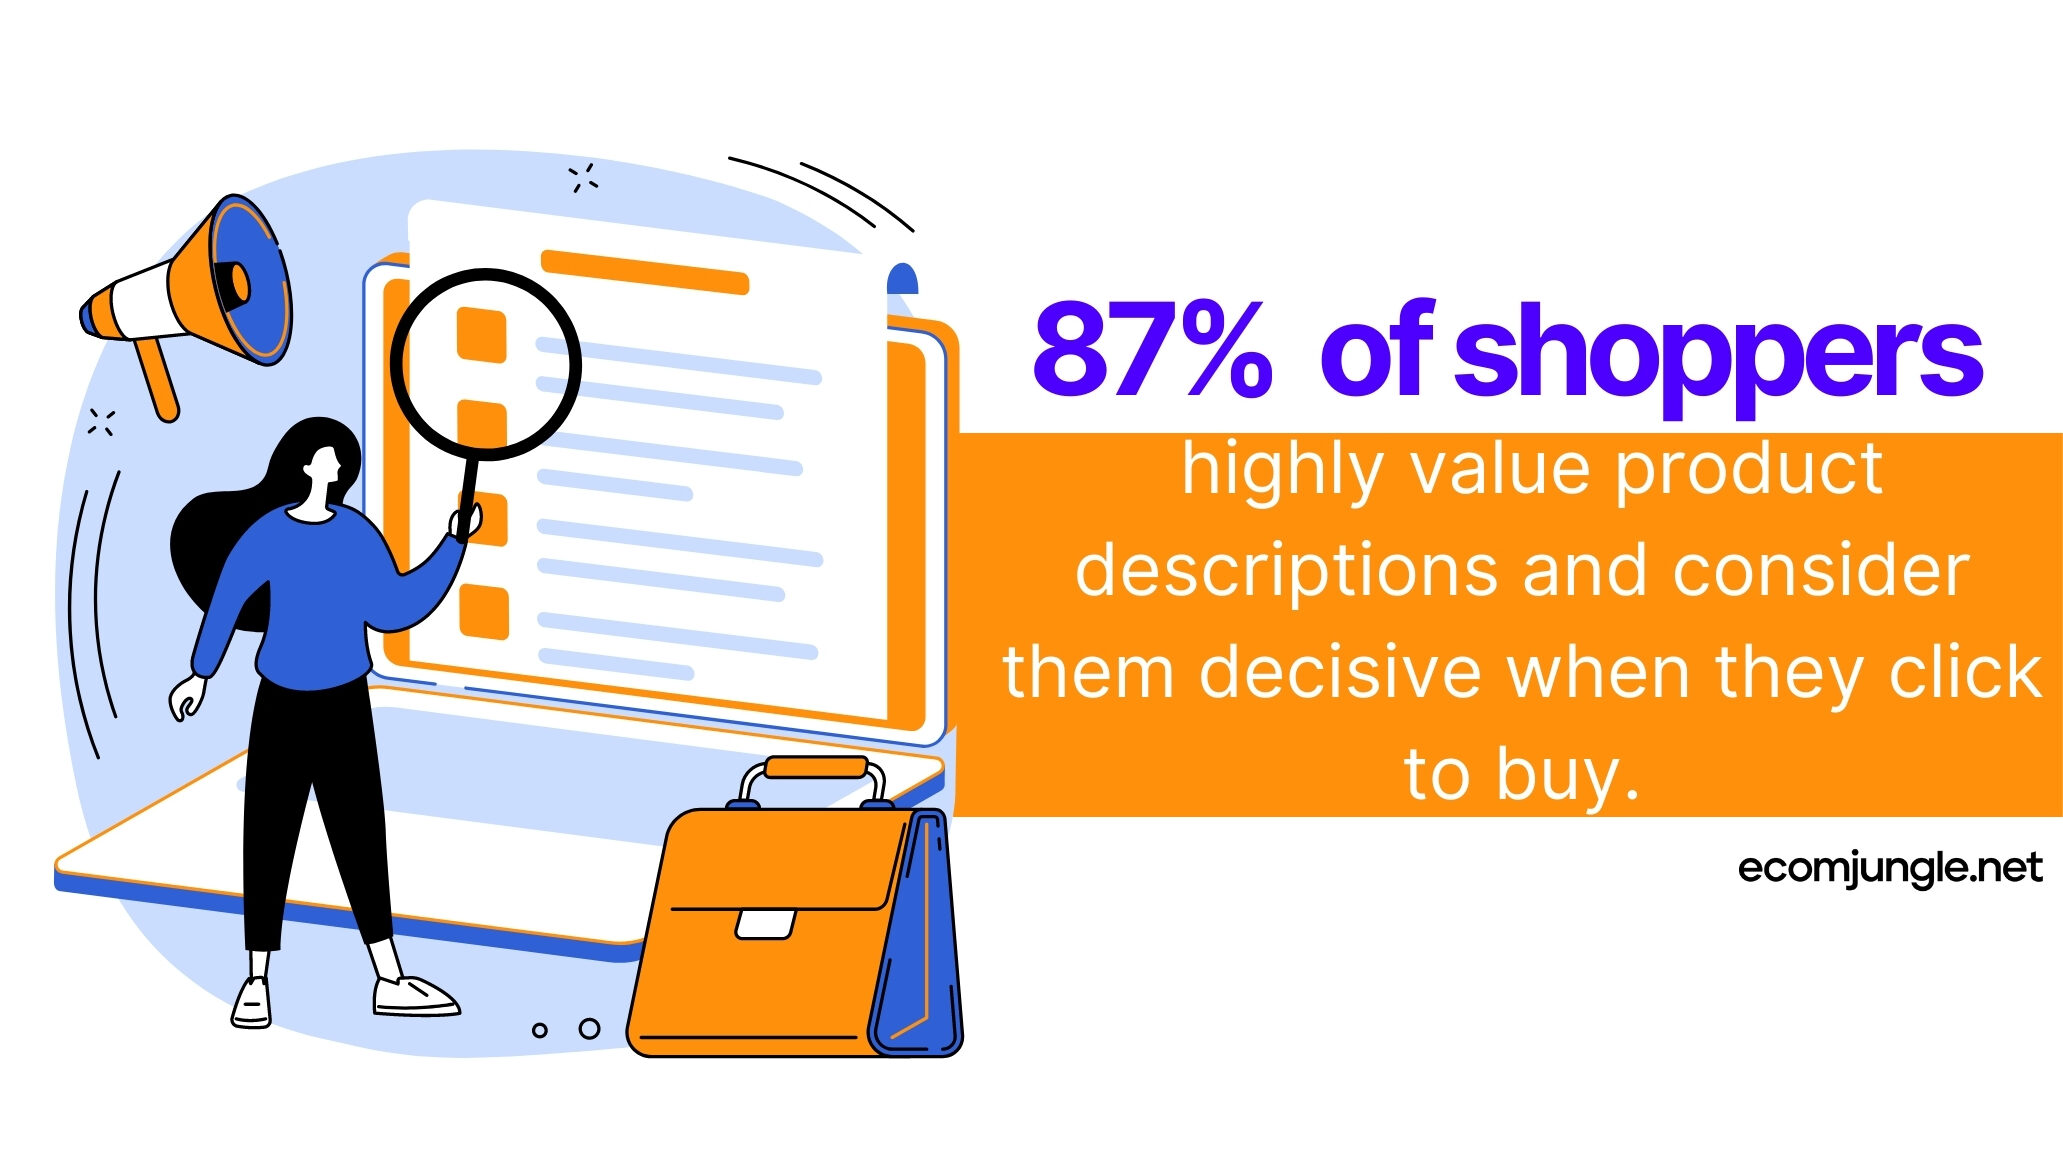 Product descriptions help shoppers narrow their choices and find the best one.